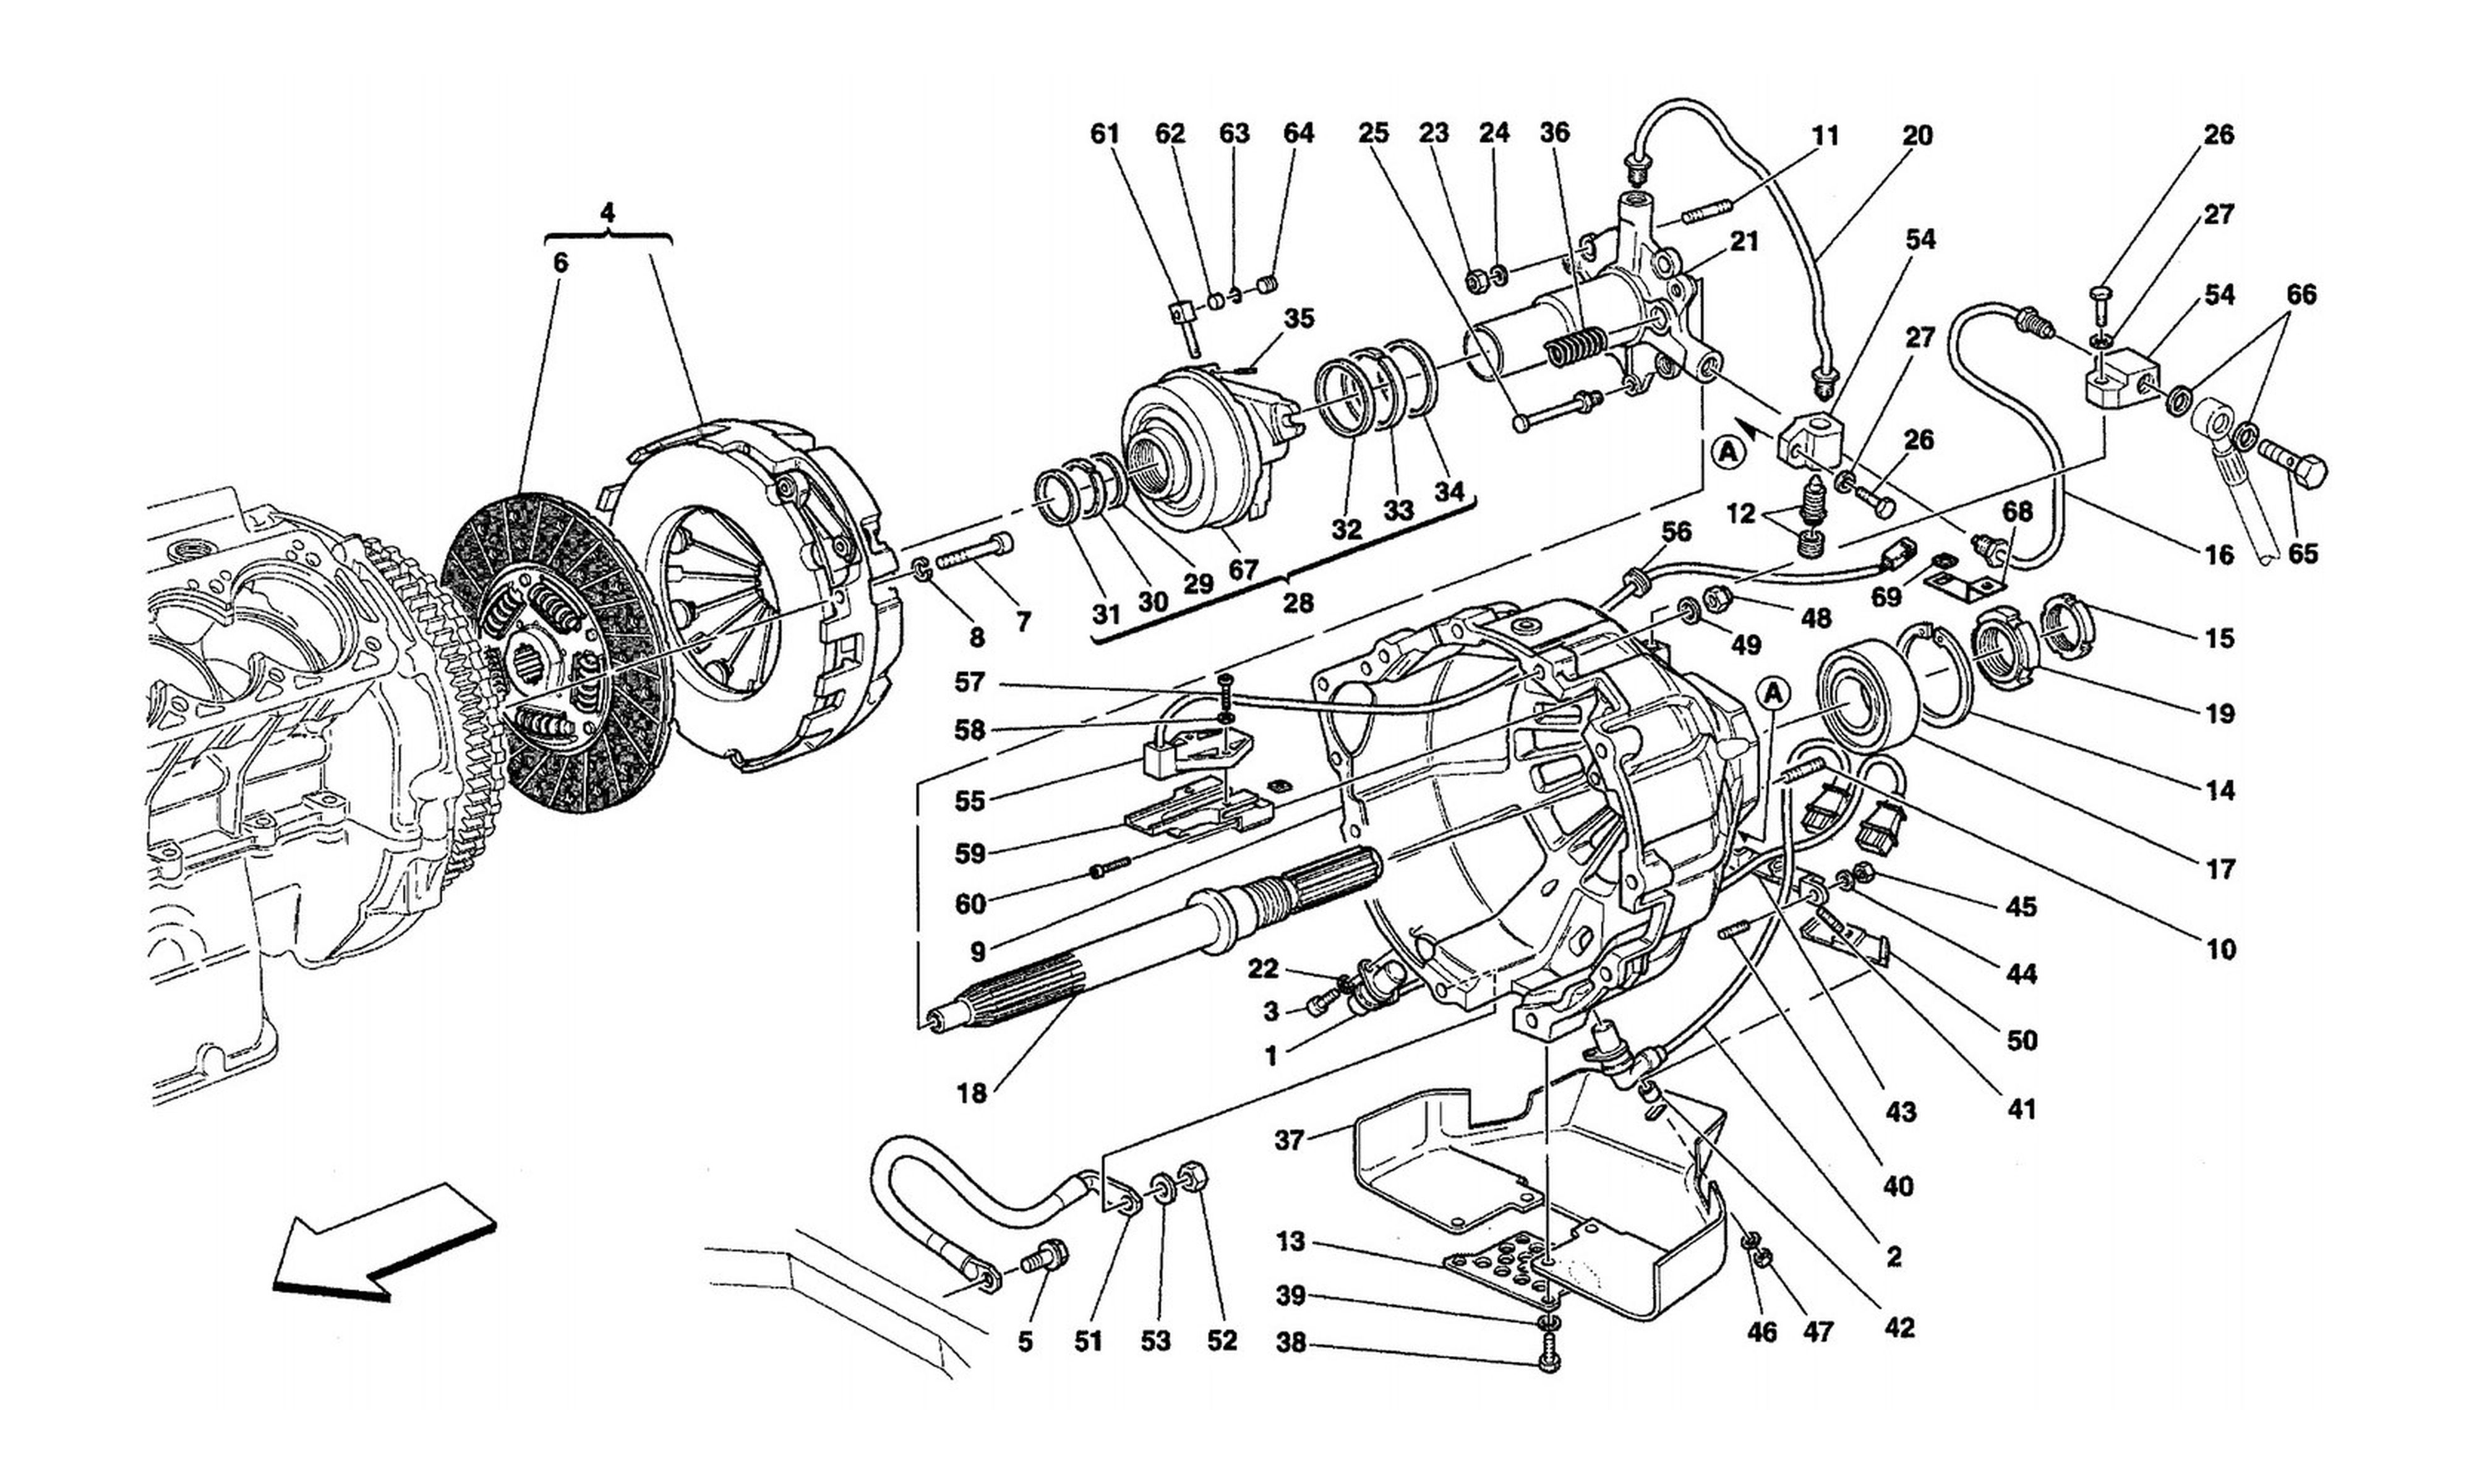 Schematic: Clutch And Controls -Valid For F1-